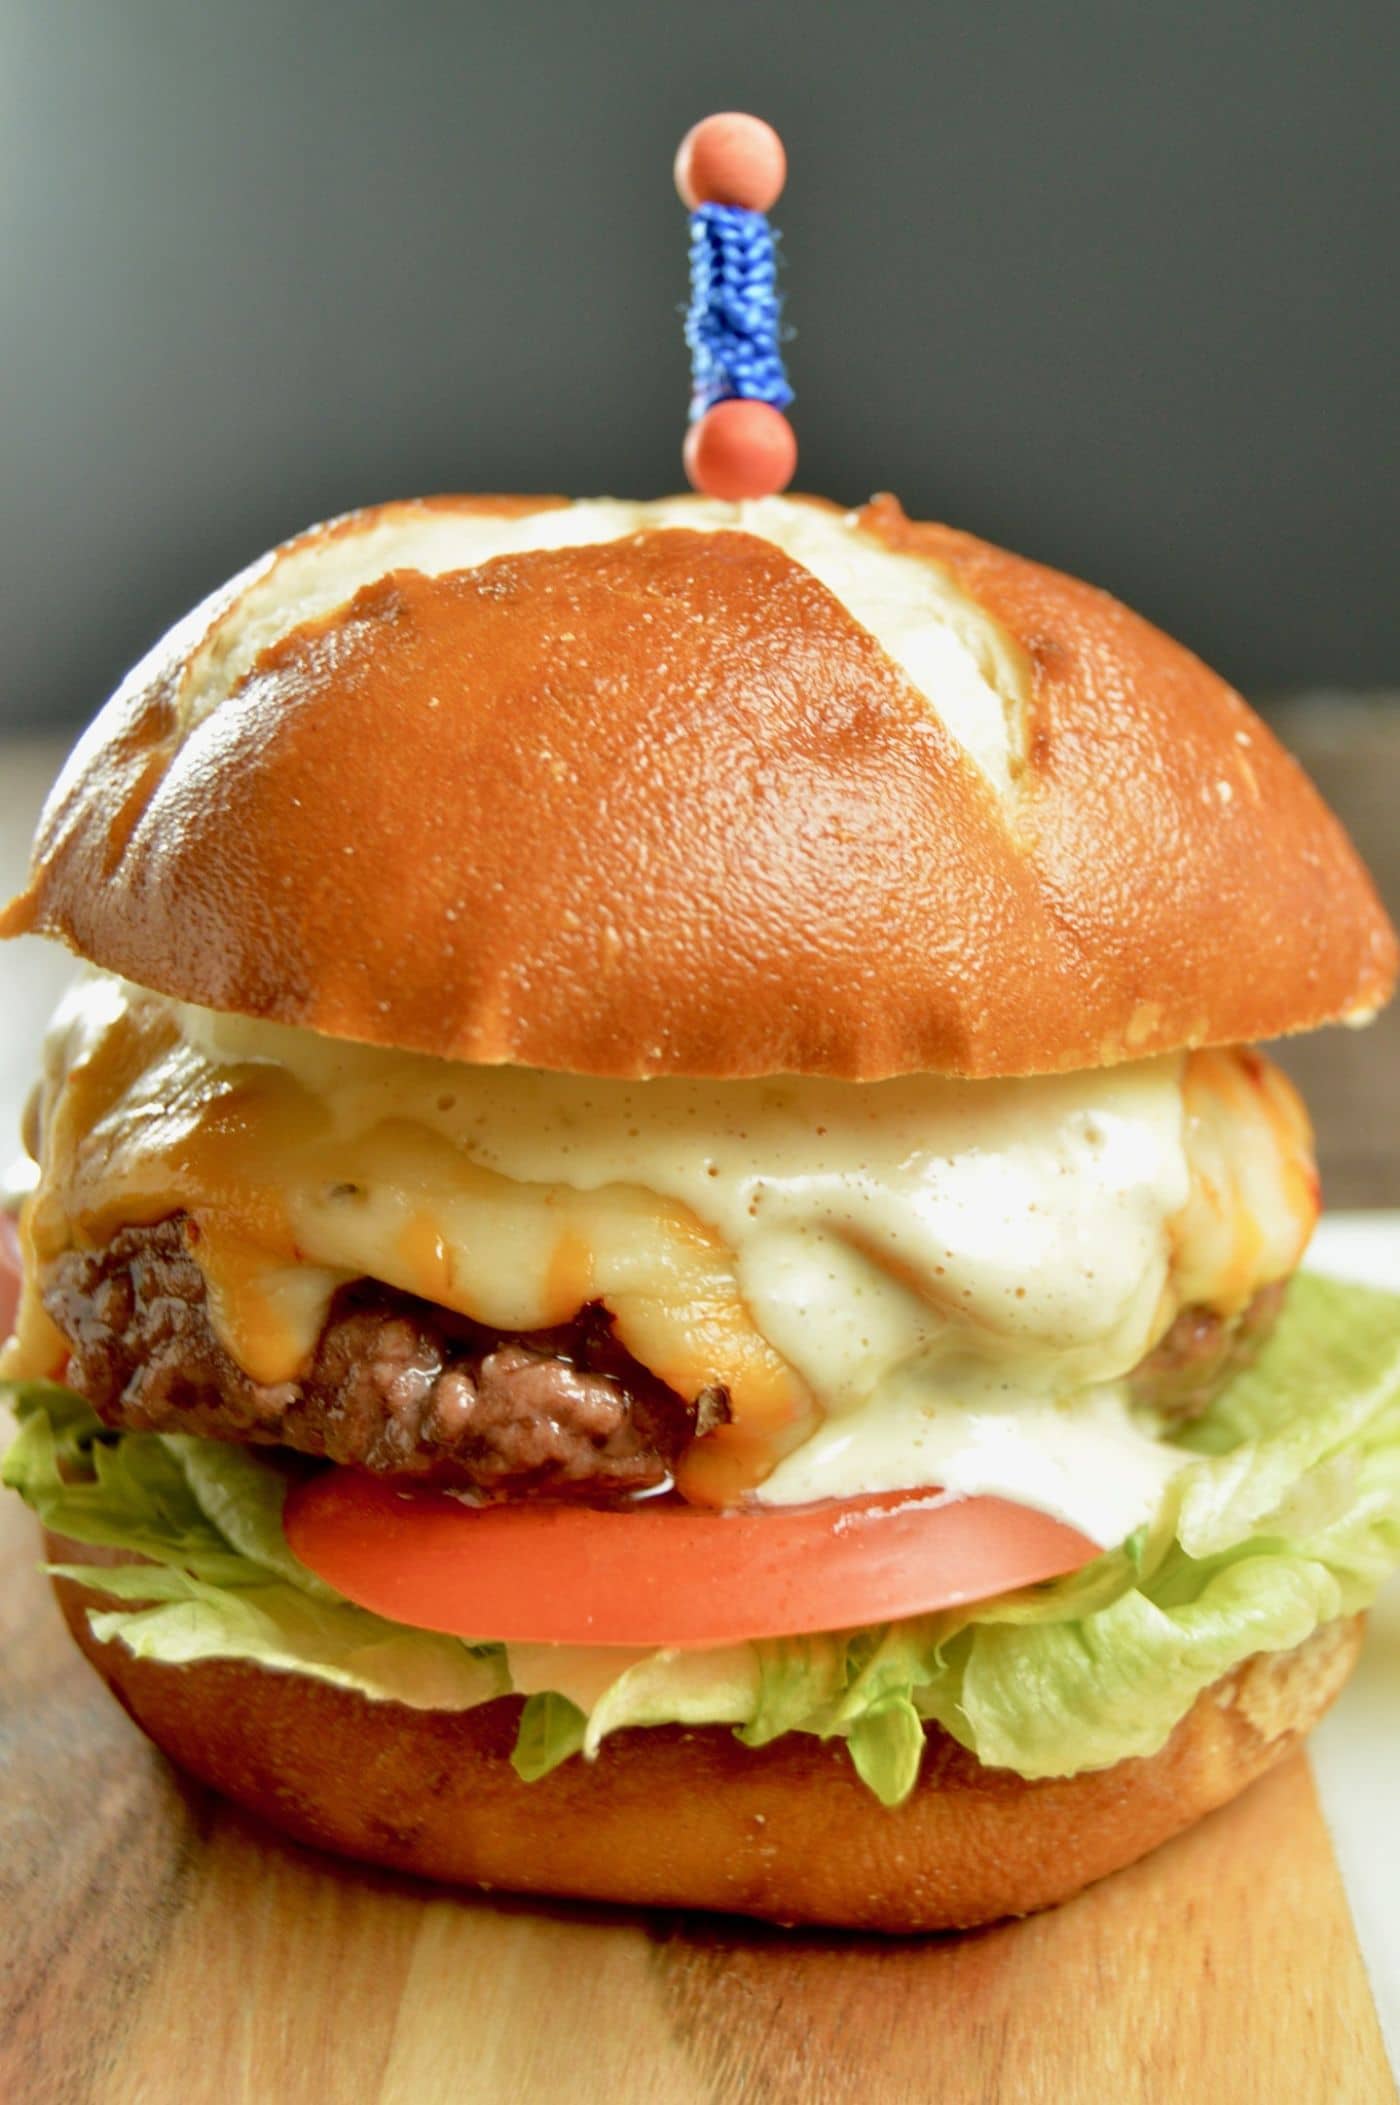 Soft bun filled with a grilled burger slathered with sauce